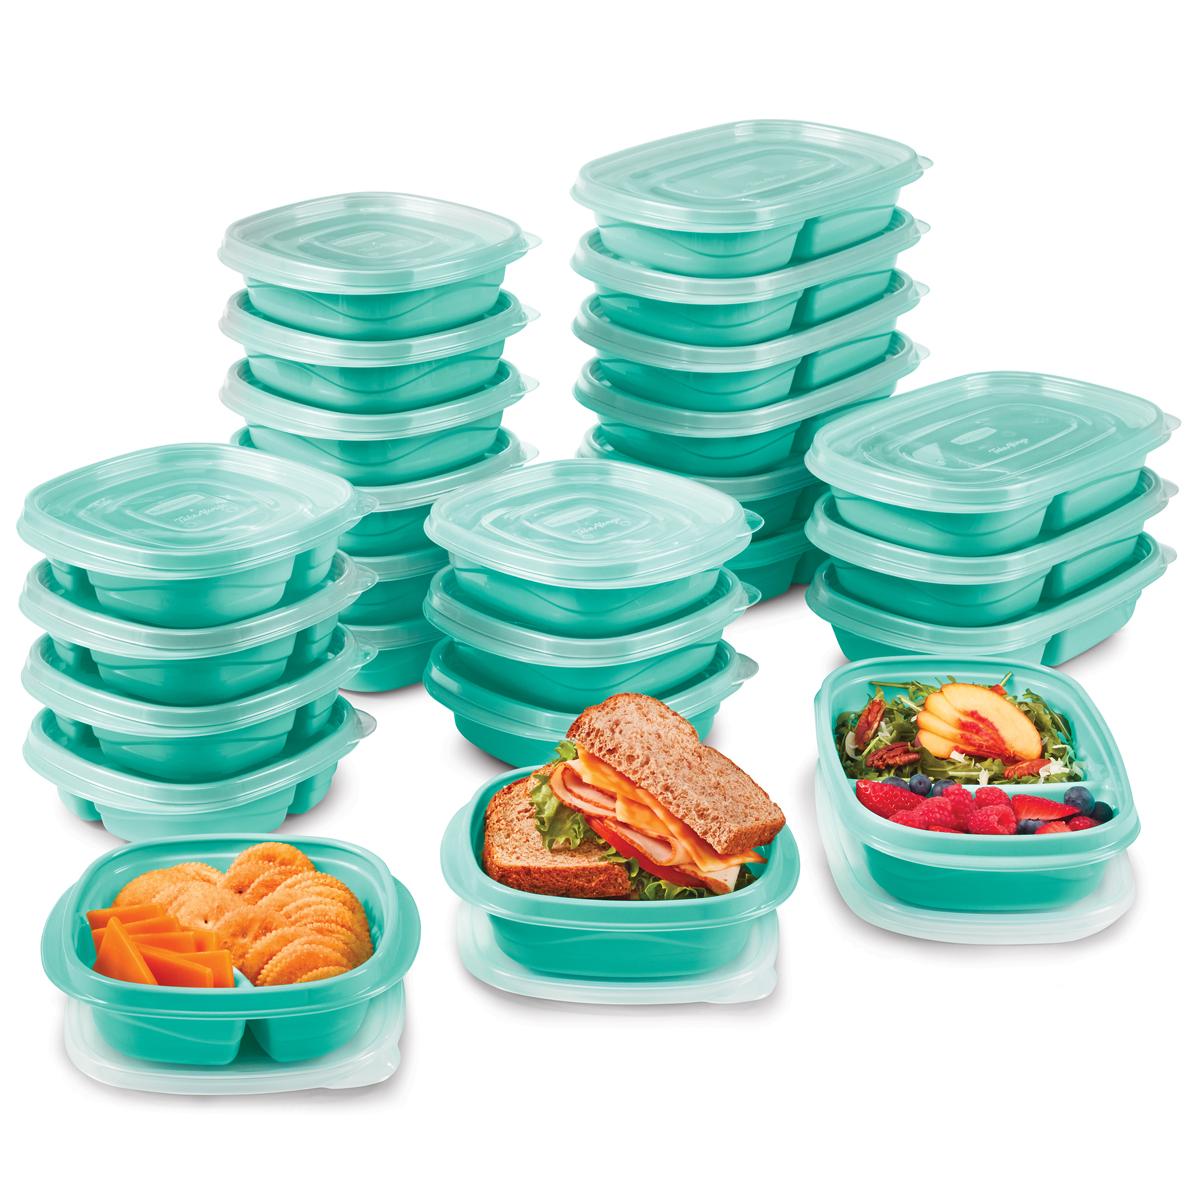 25 Rubbermaid TakeAlongs On The Go Food Storage and Meal Prep Containers for $12.71